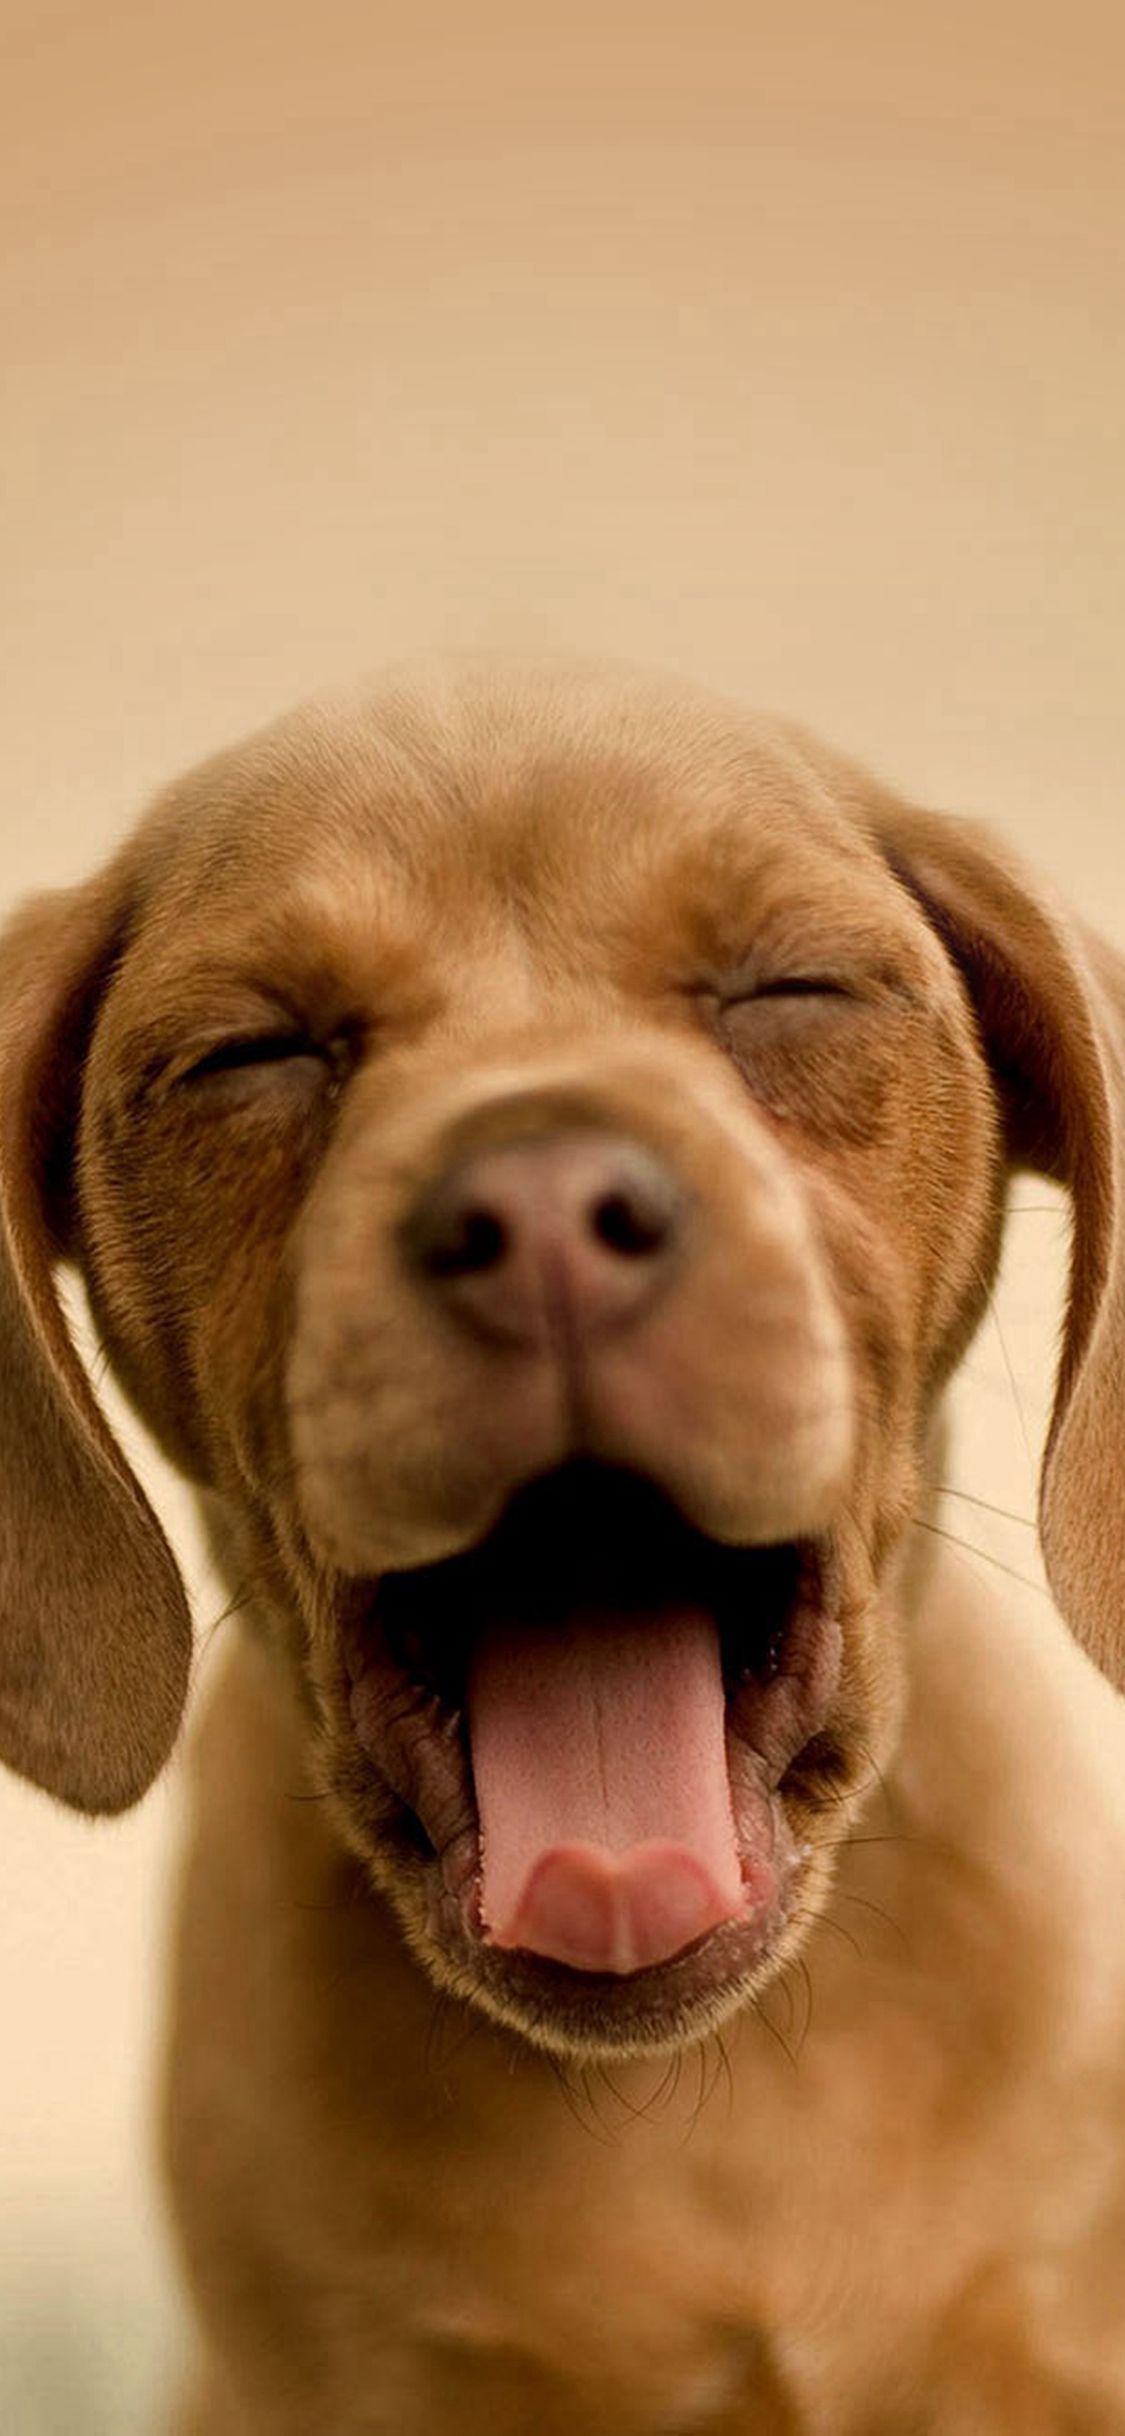 Cute Yawning Puppy iPhone X Wallpaper Free Download